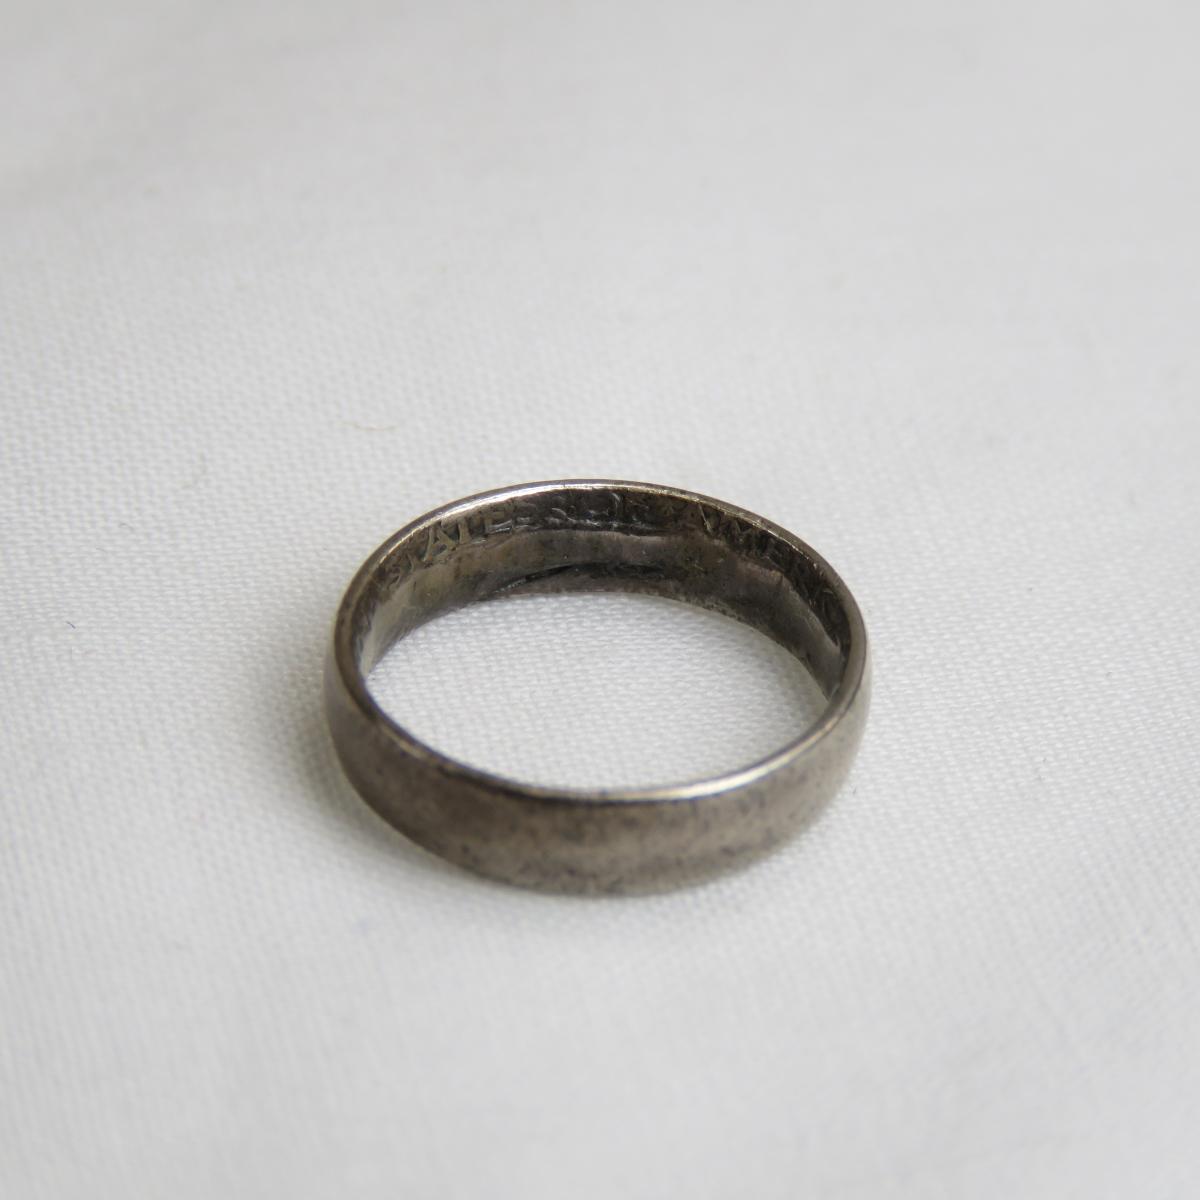 Brass ring made in Finland and 3 others